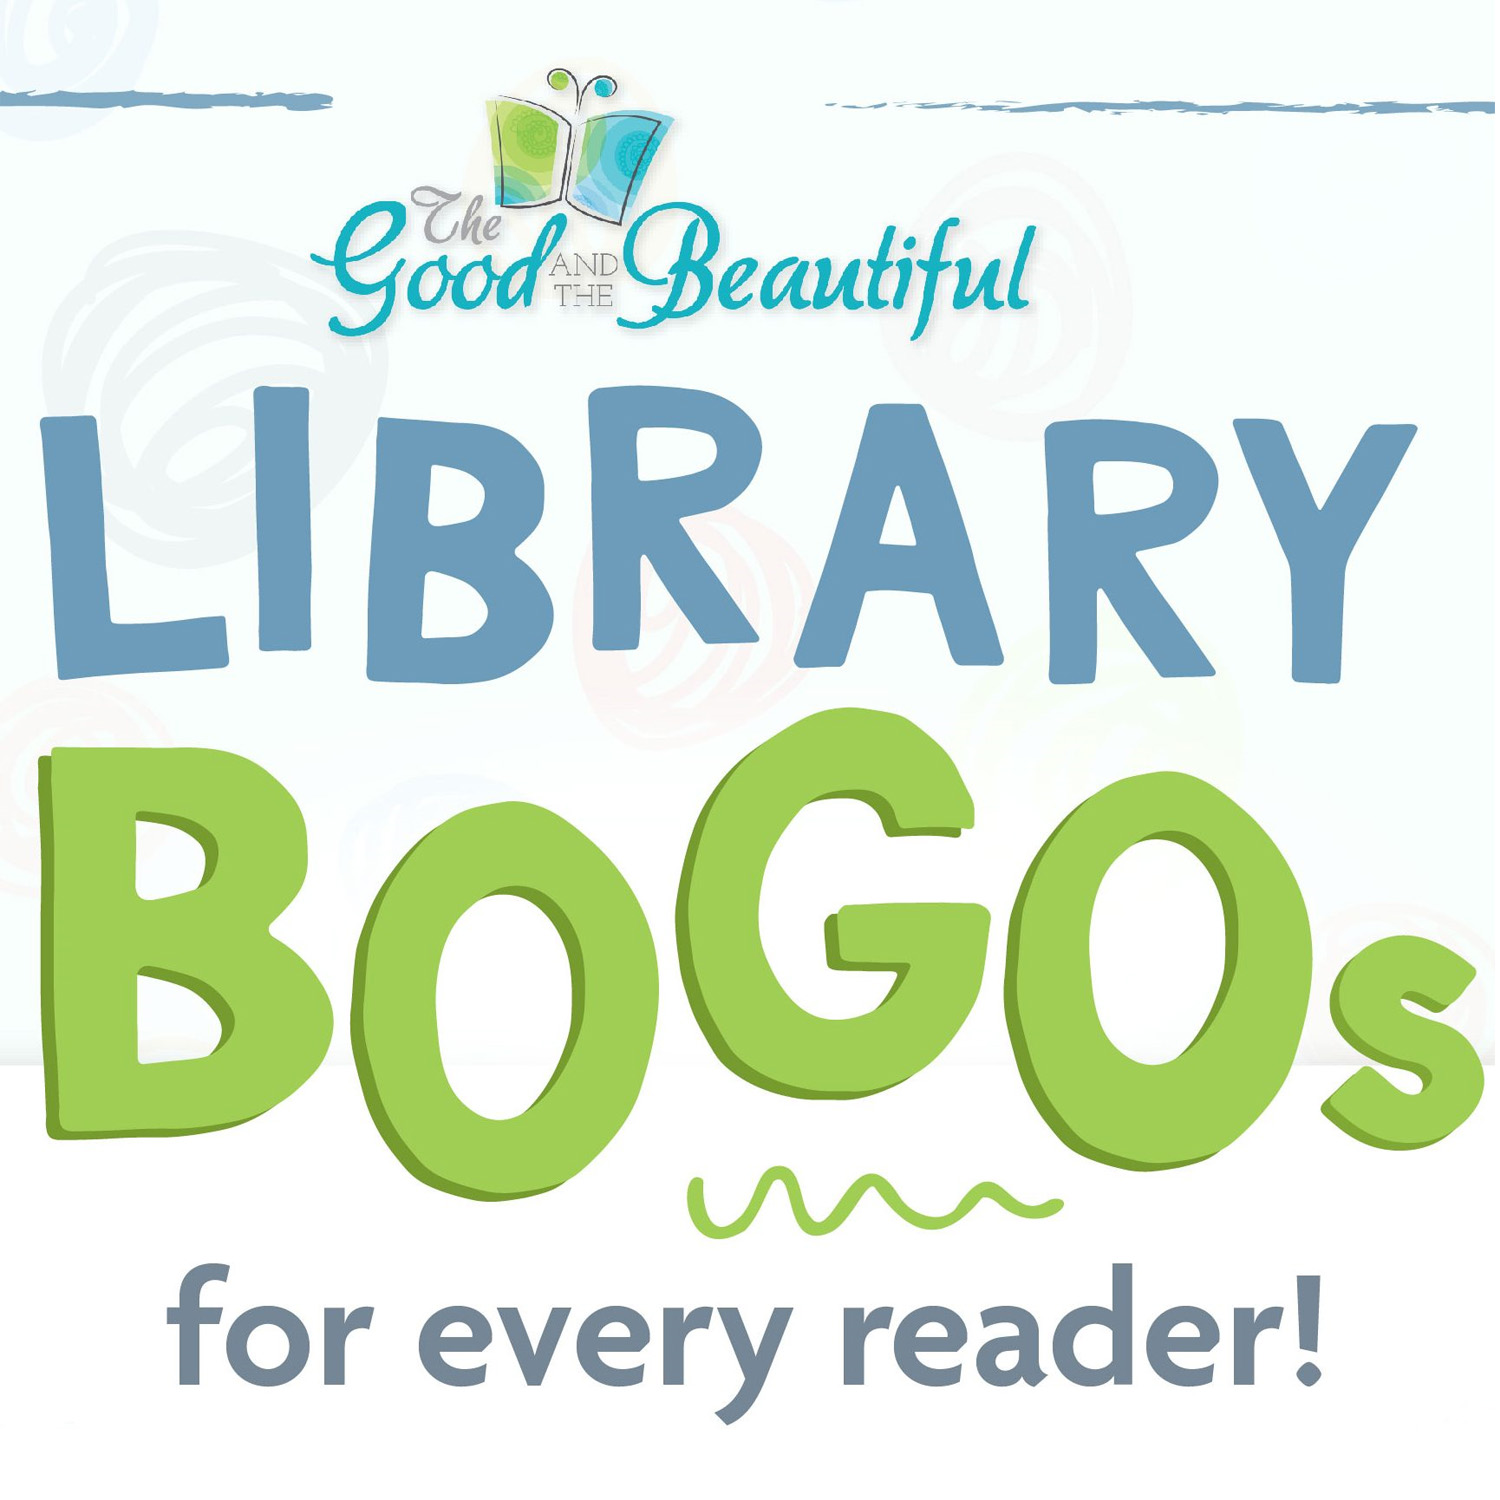 Il @@ g UHNE BOGO: for every reader! 